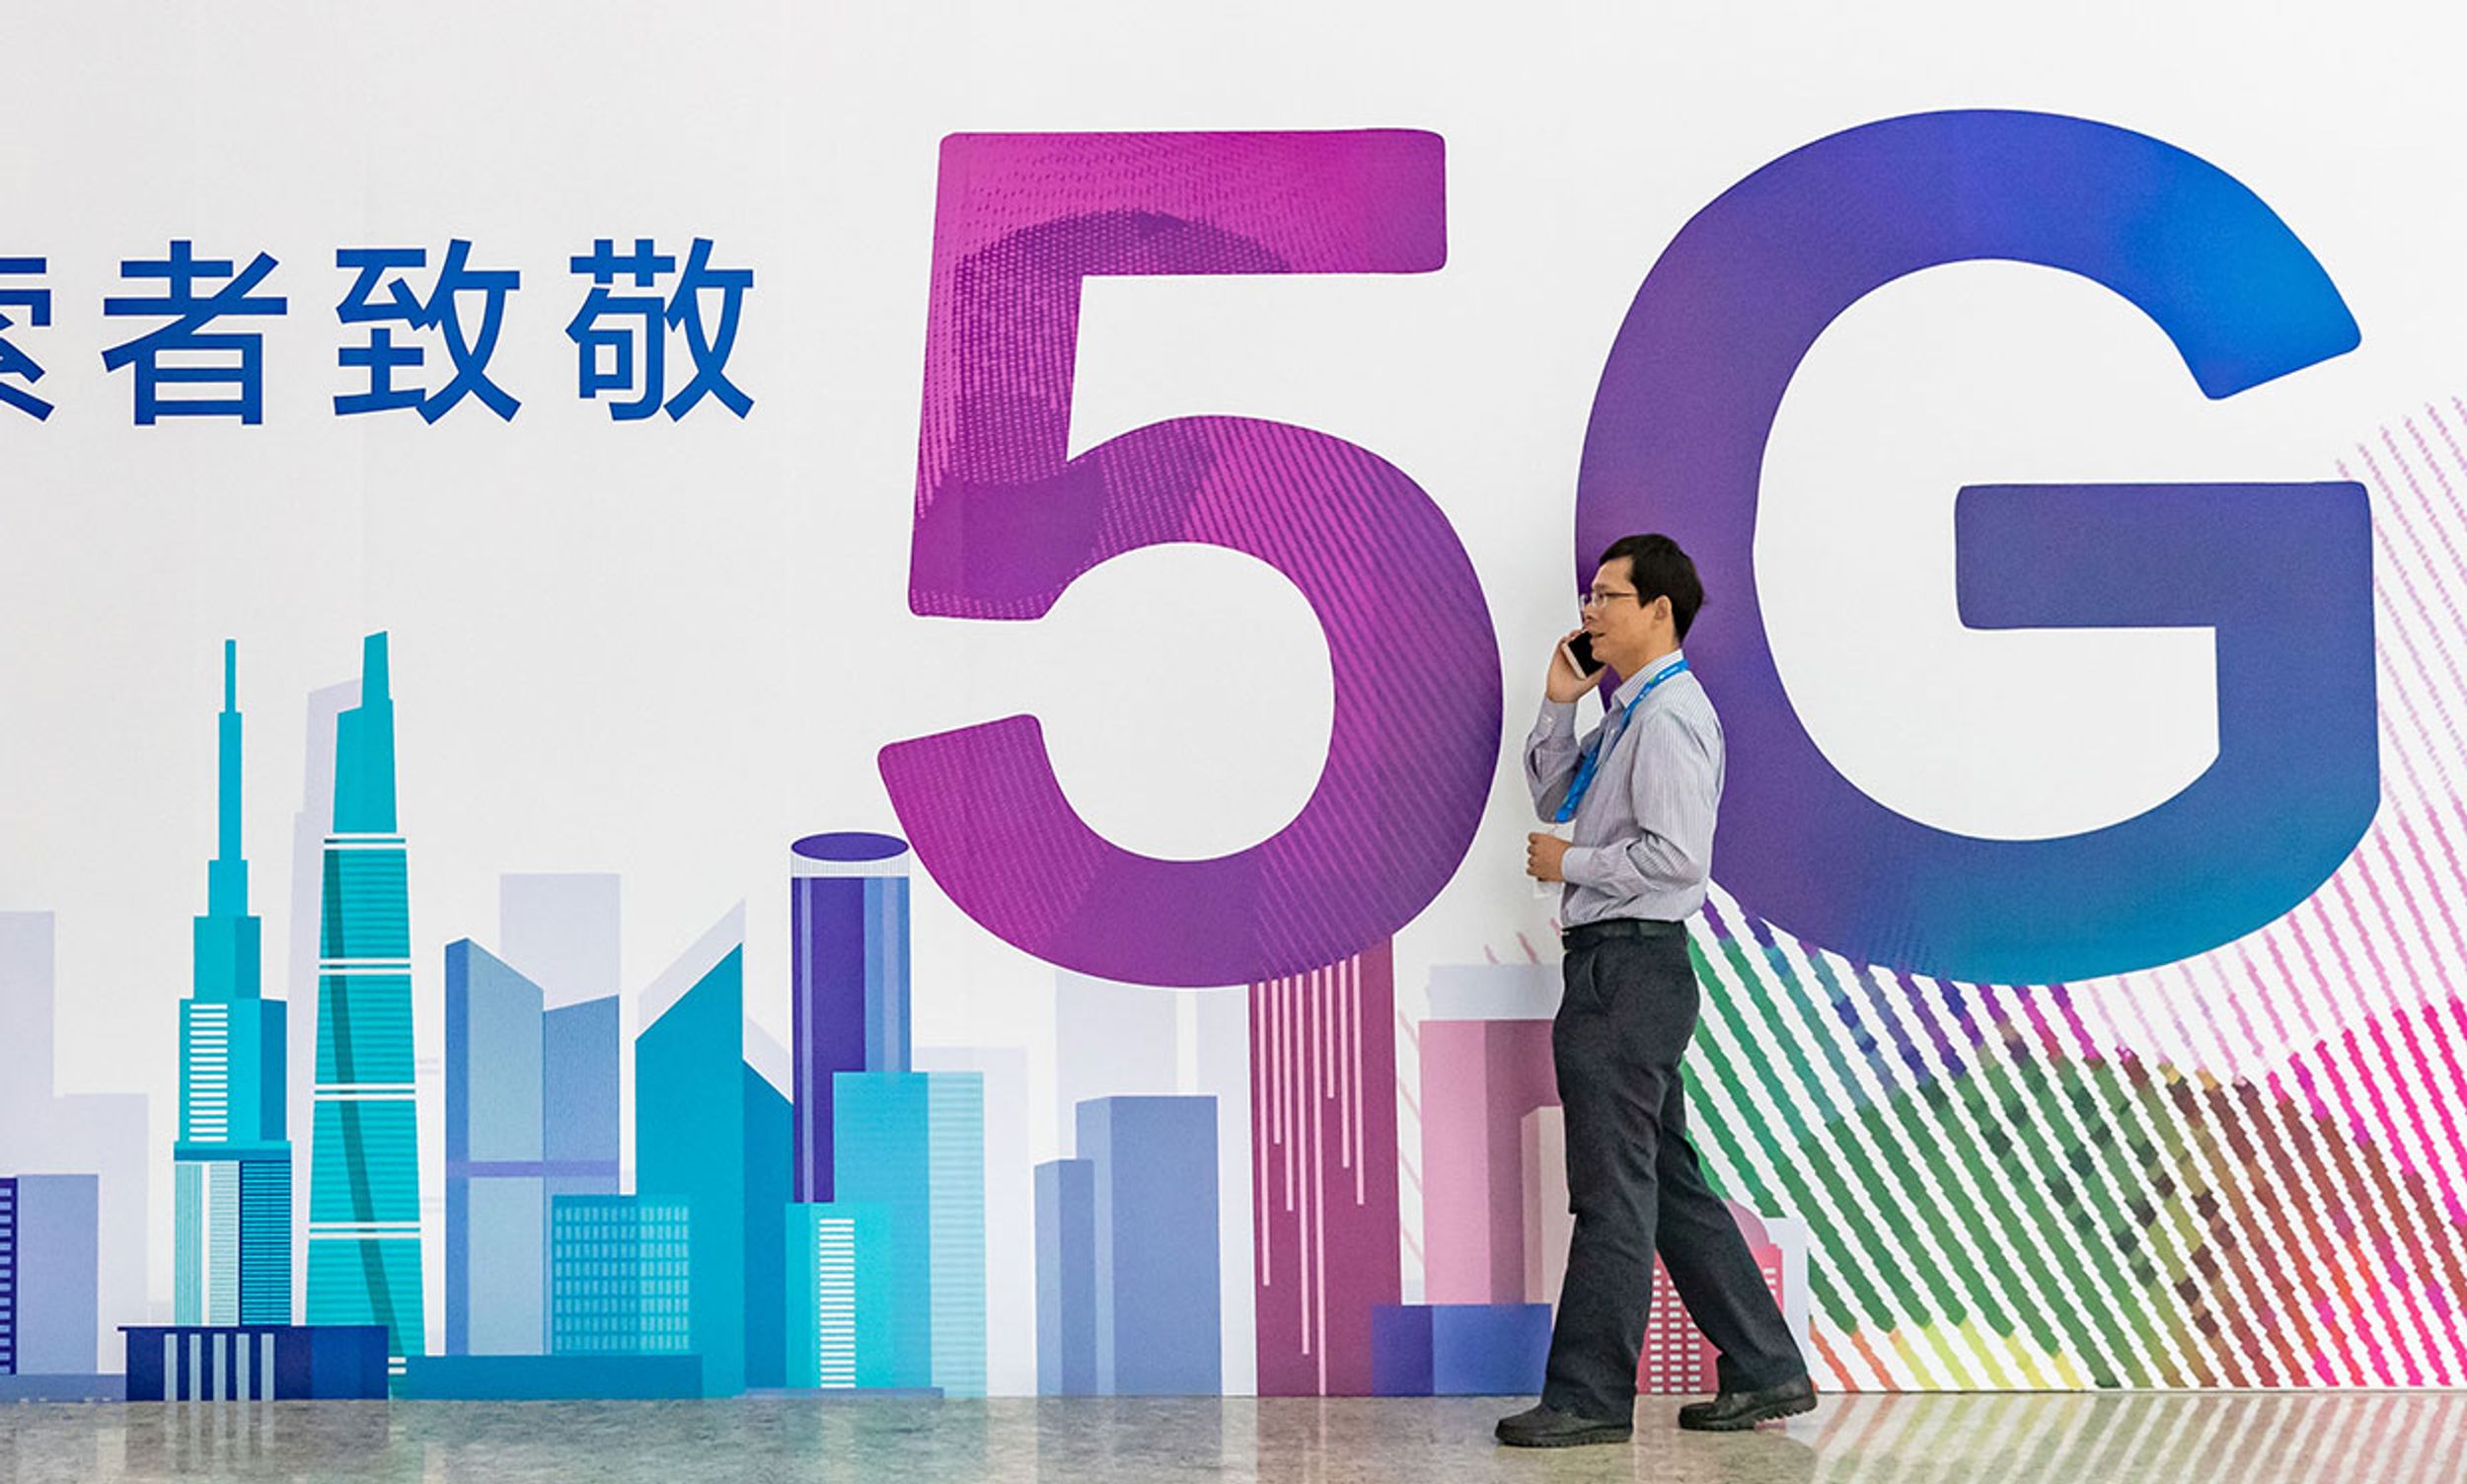 Photograph of a man in front of a 5G sign with Chinese characters on it.